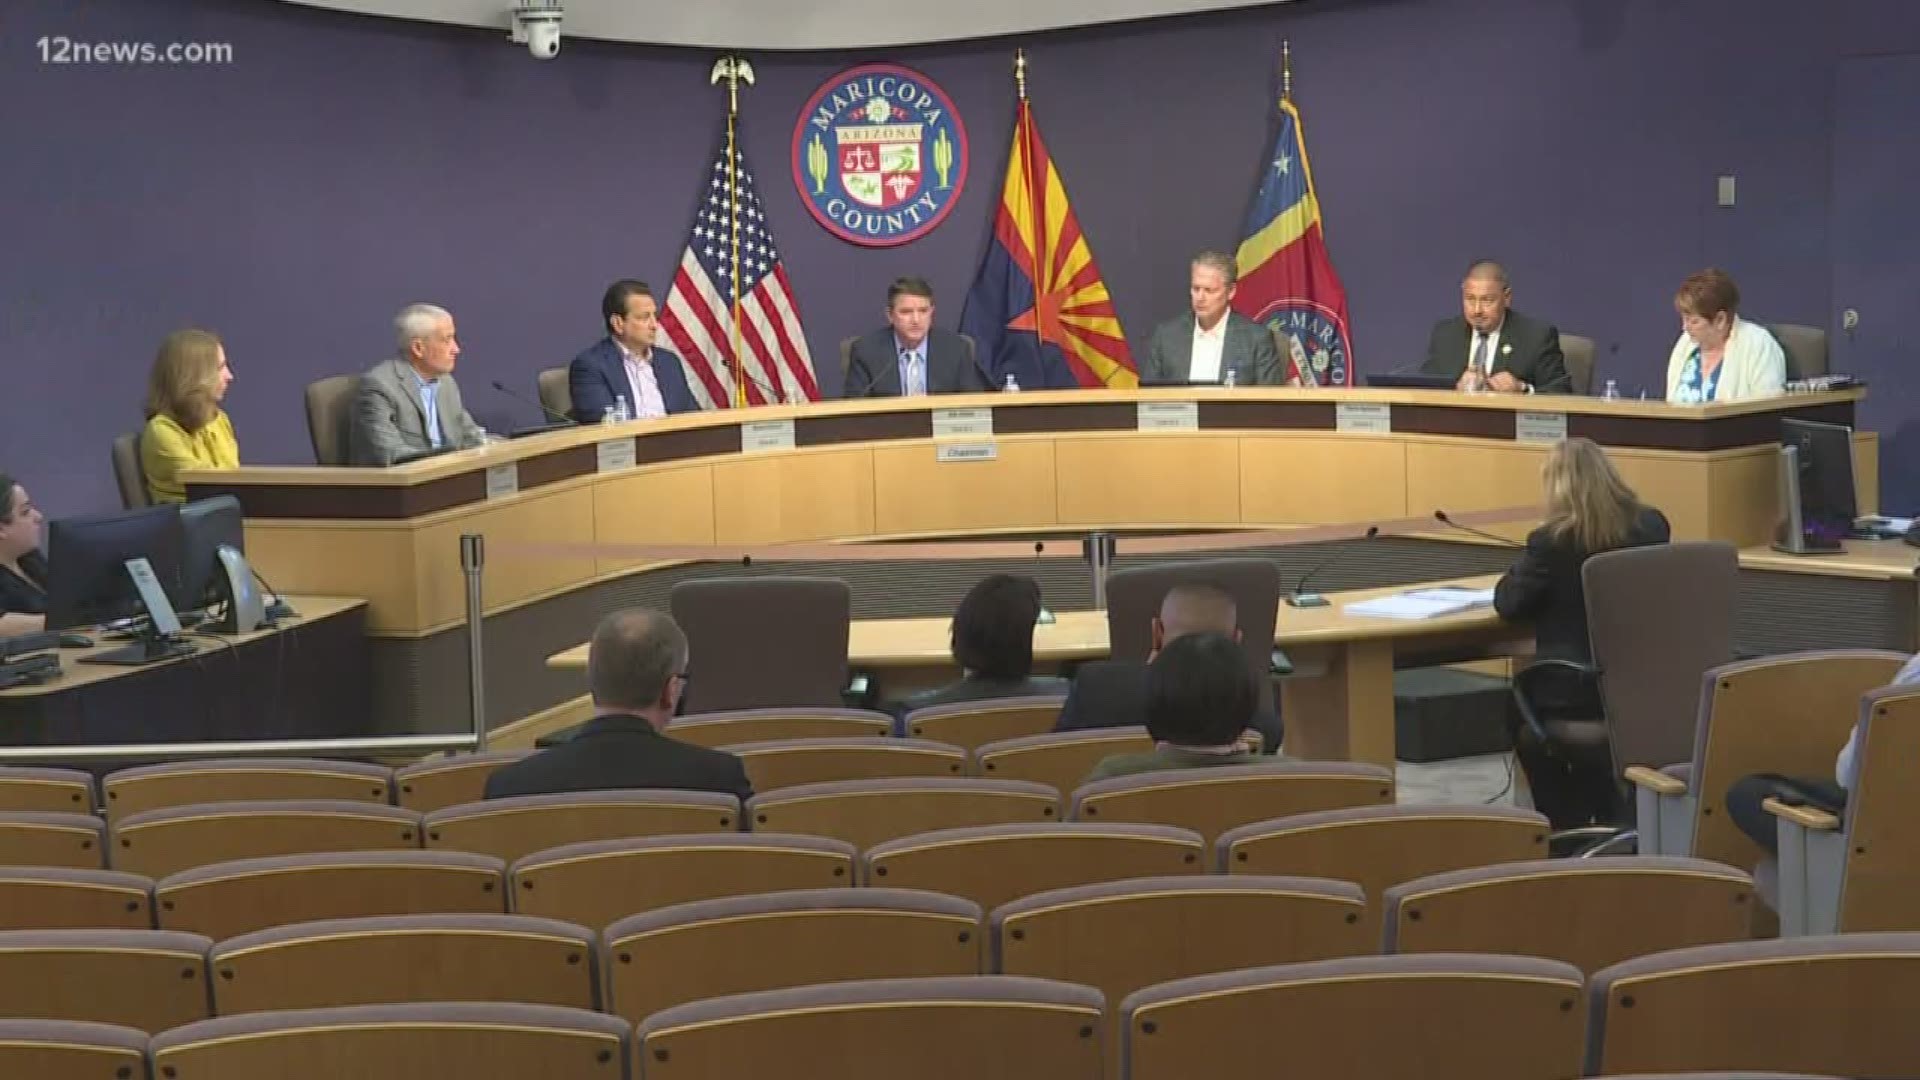 The Maricopa County Board of Supervisors voted to suspend Assessor Paul Petersen for 120 days. Petersen's computer had relatively few job-related documents.